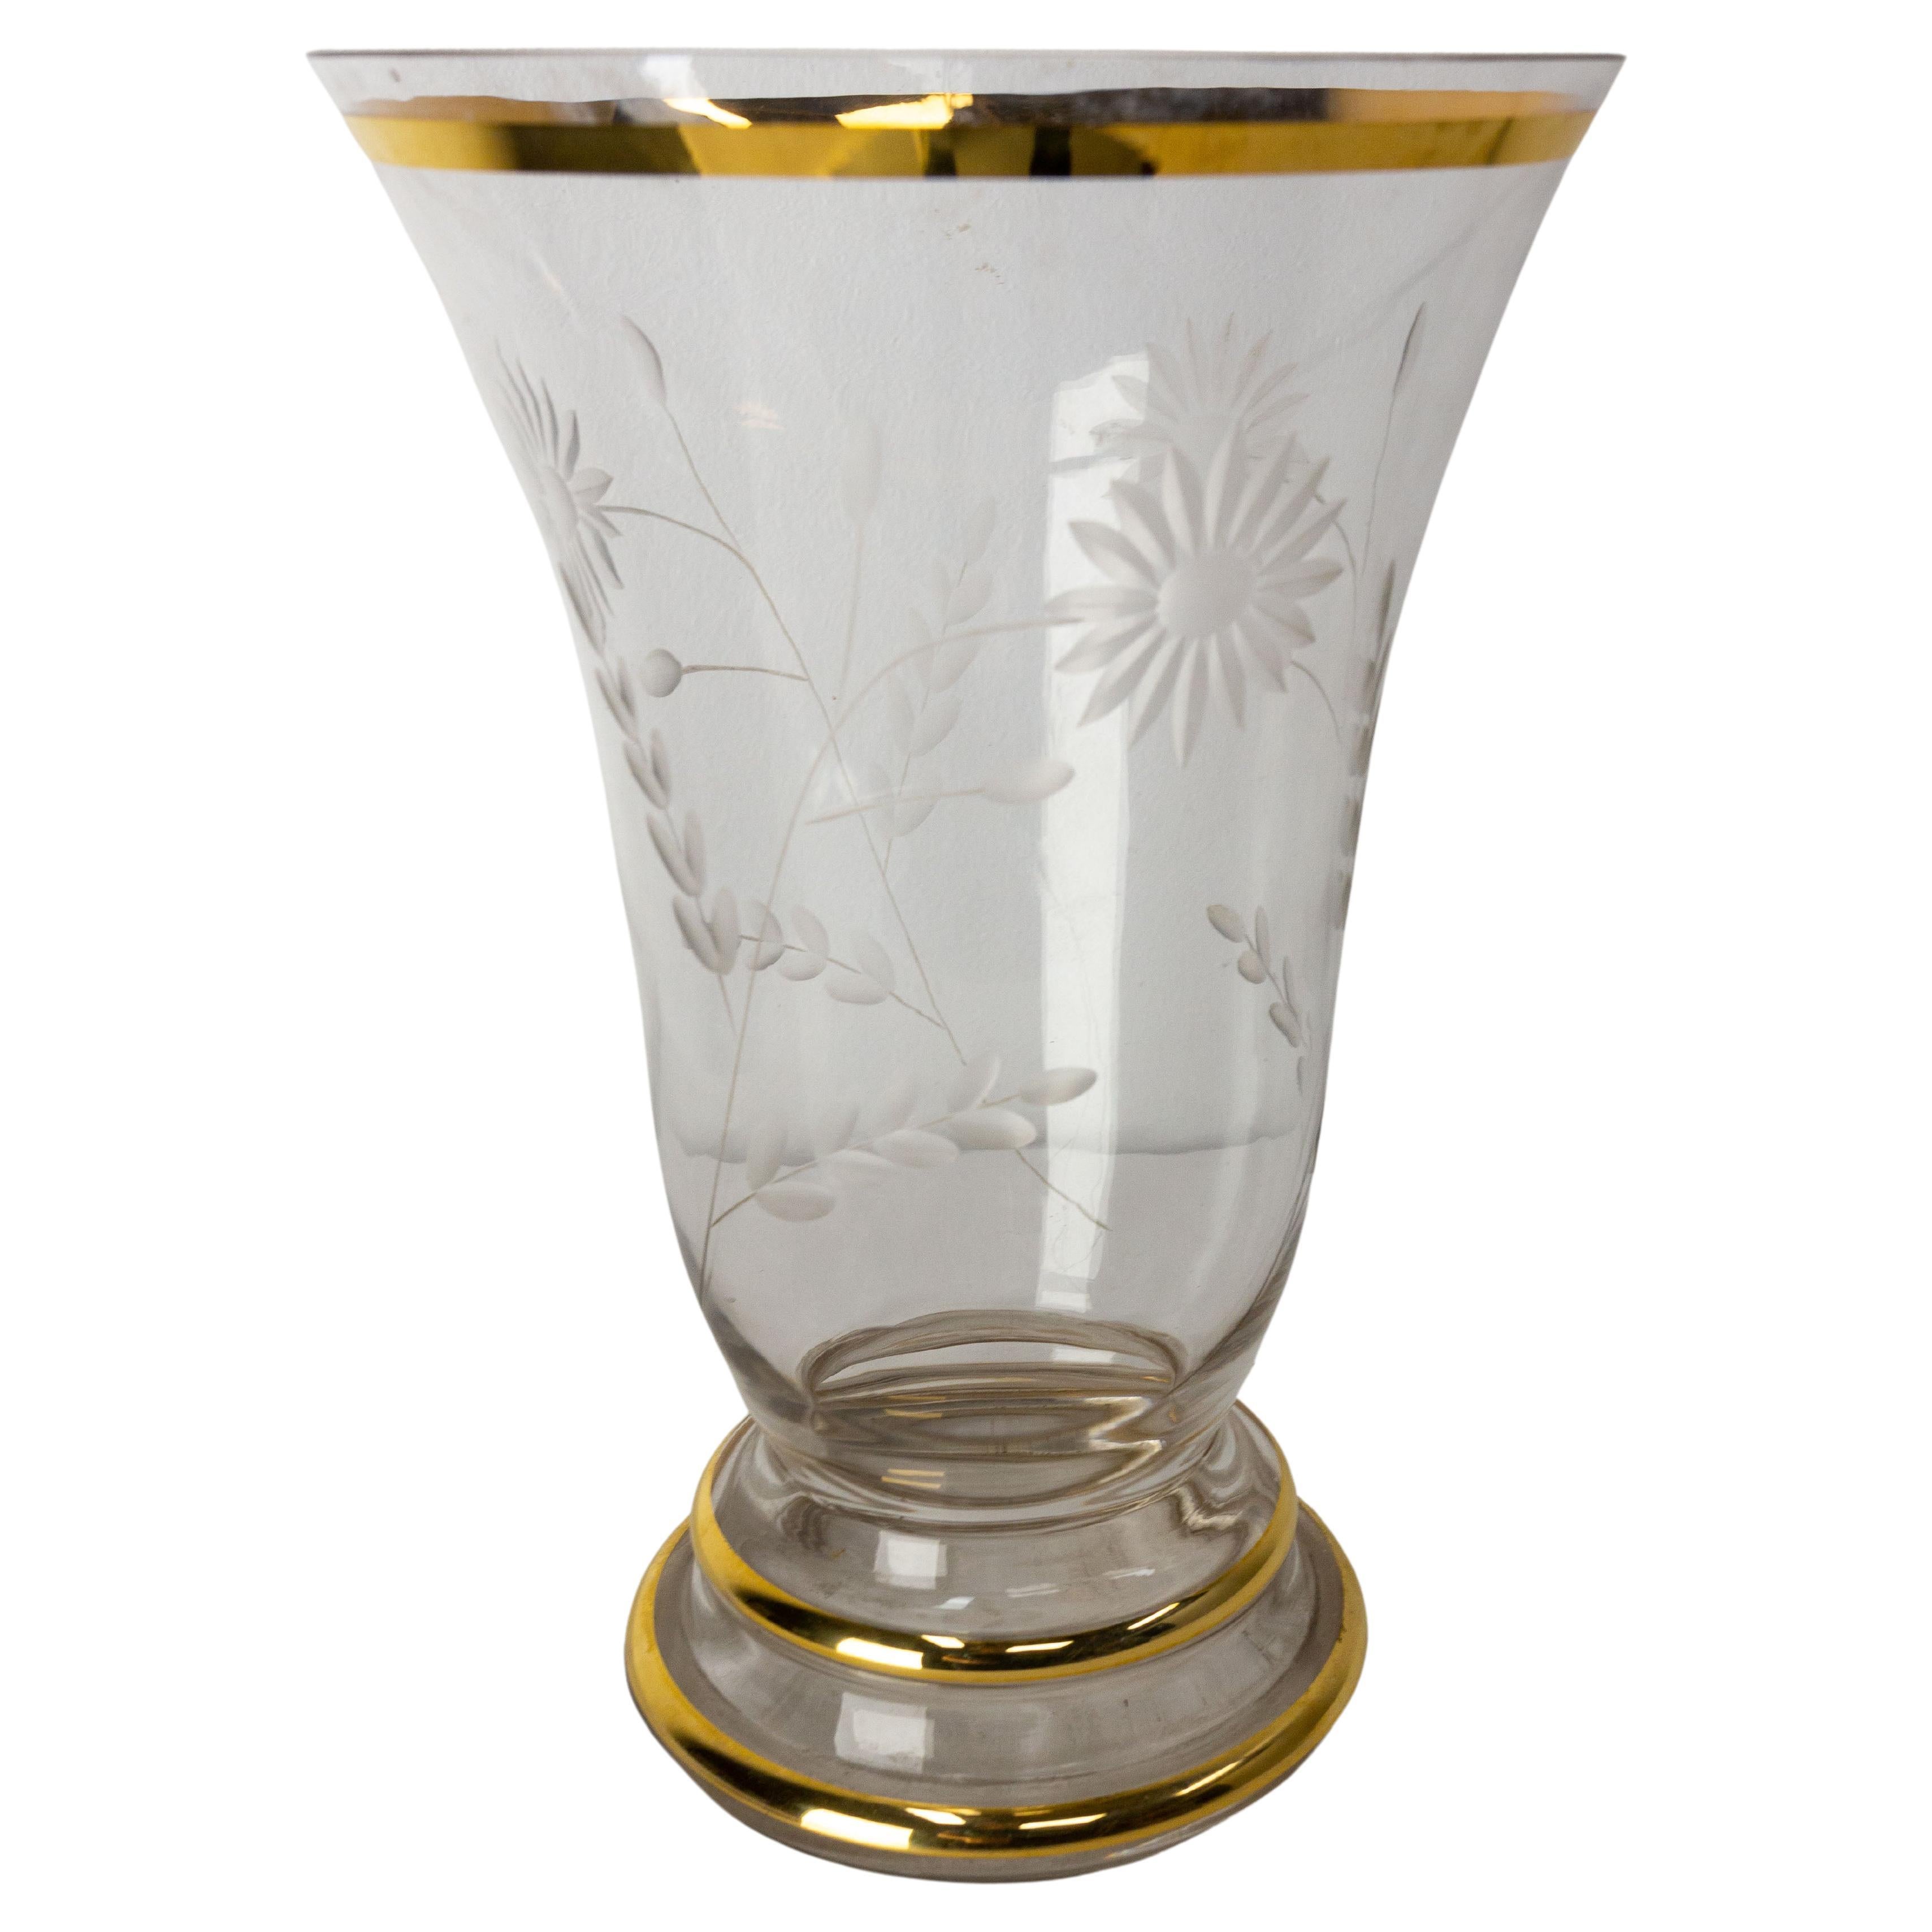 French Vase Glass Golden Neck and Base, Flowers Engraved, circa 1960